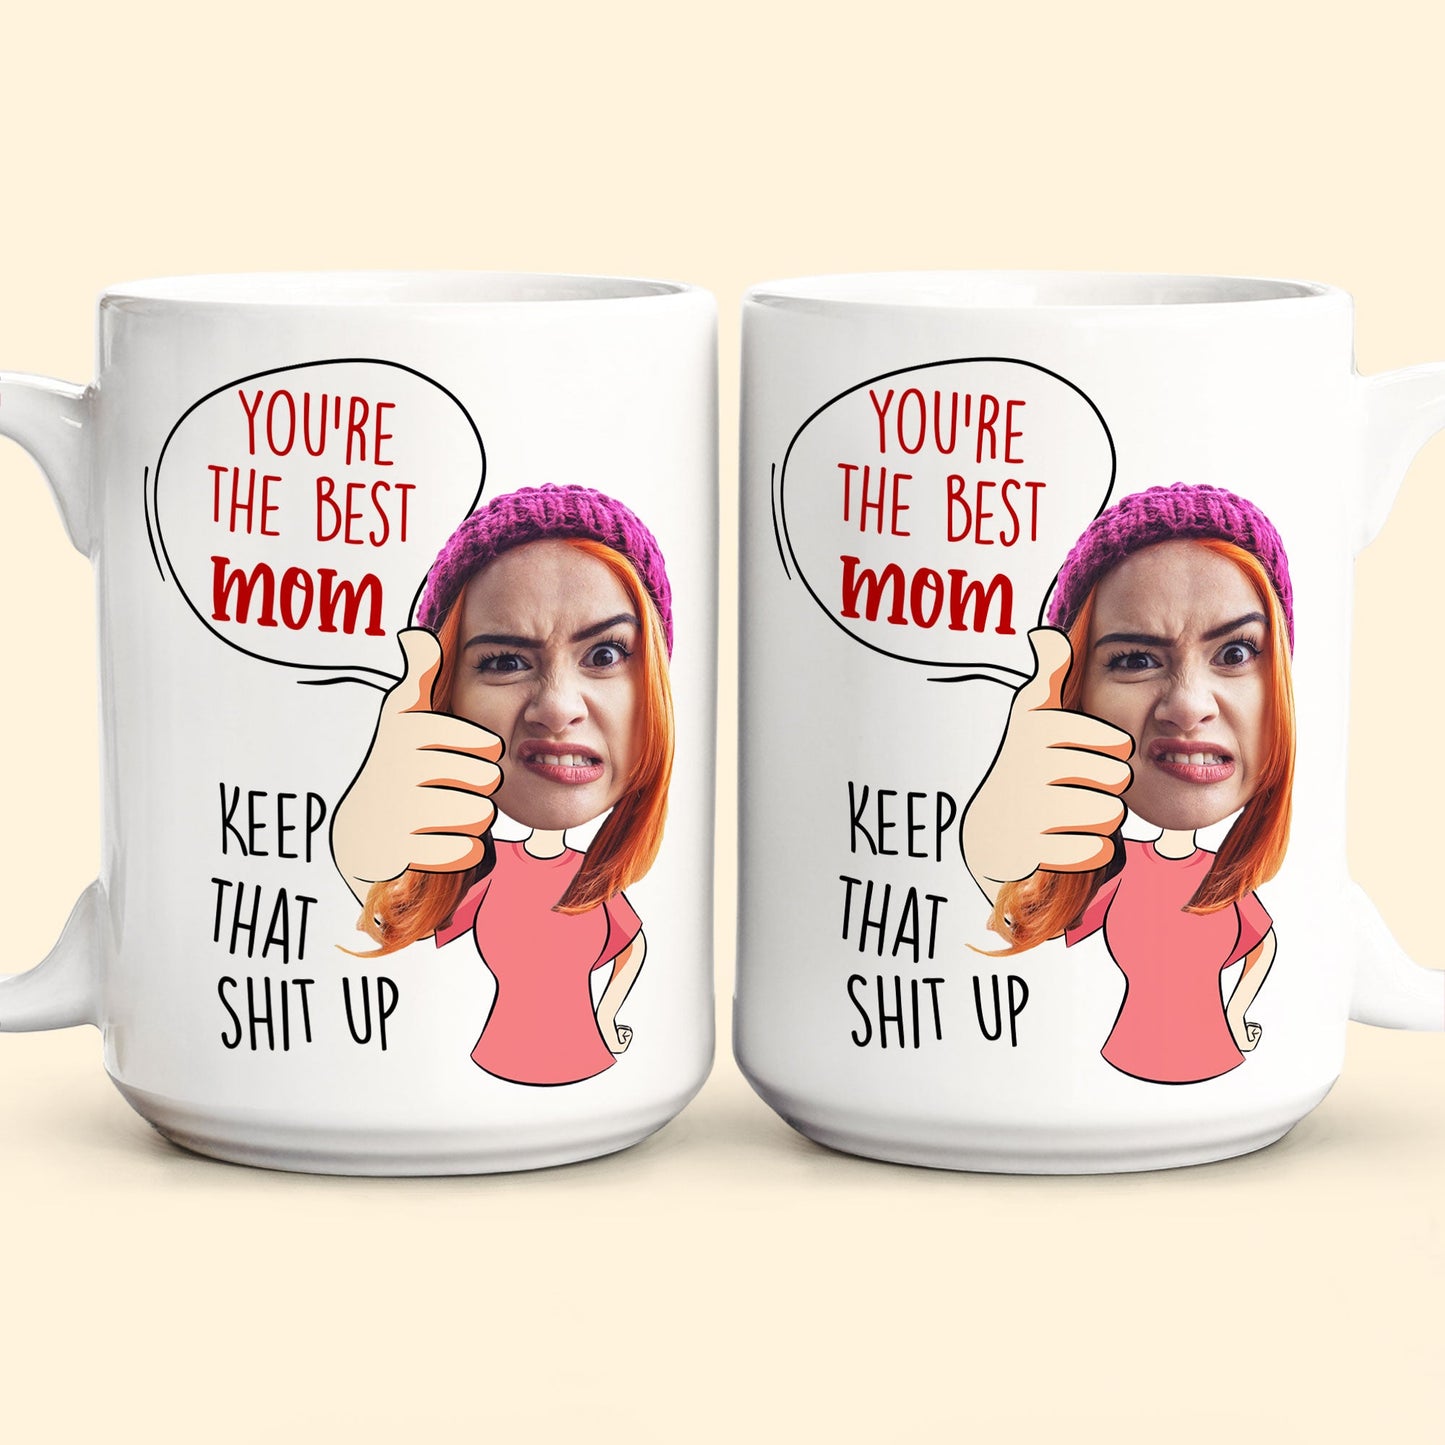 You Are The Best Mom - Personalized Photo Mug